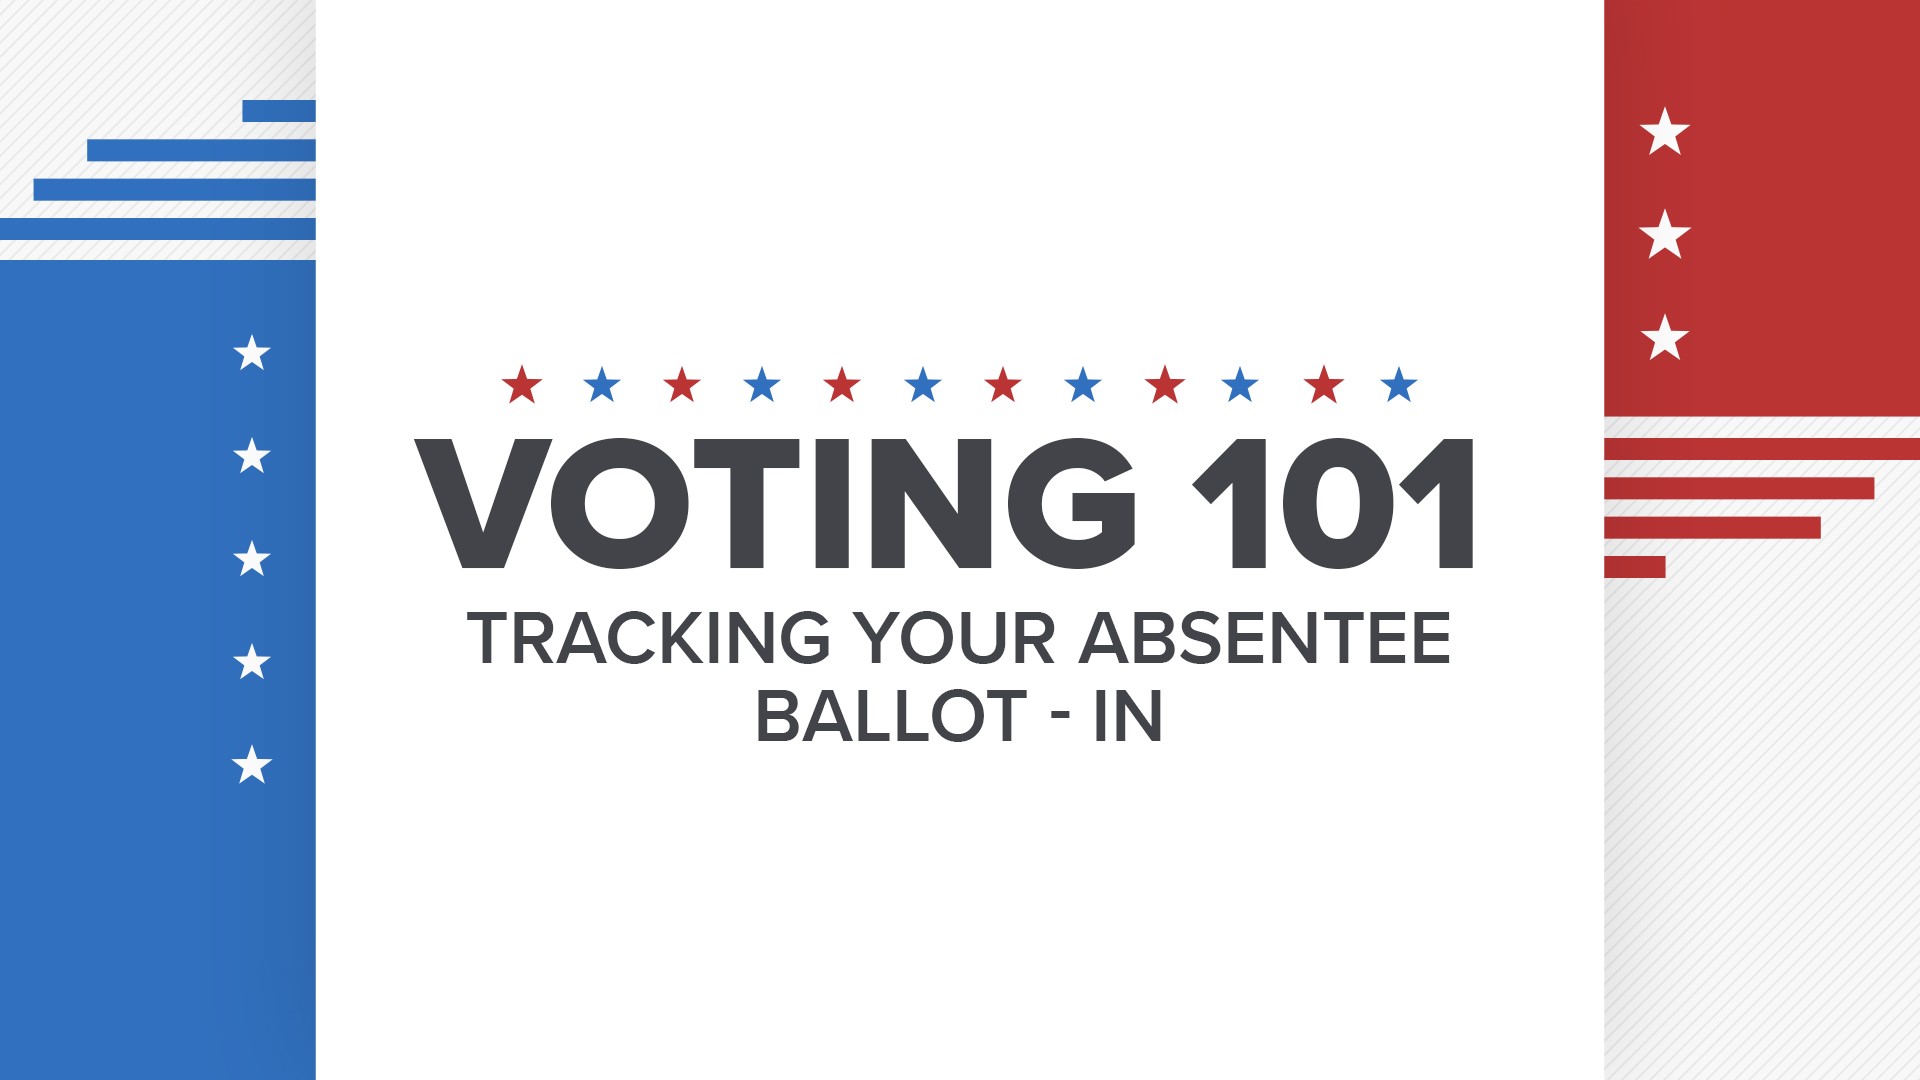 If you're nervous about where your absentee ballot is, you can check its status online.